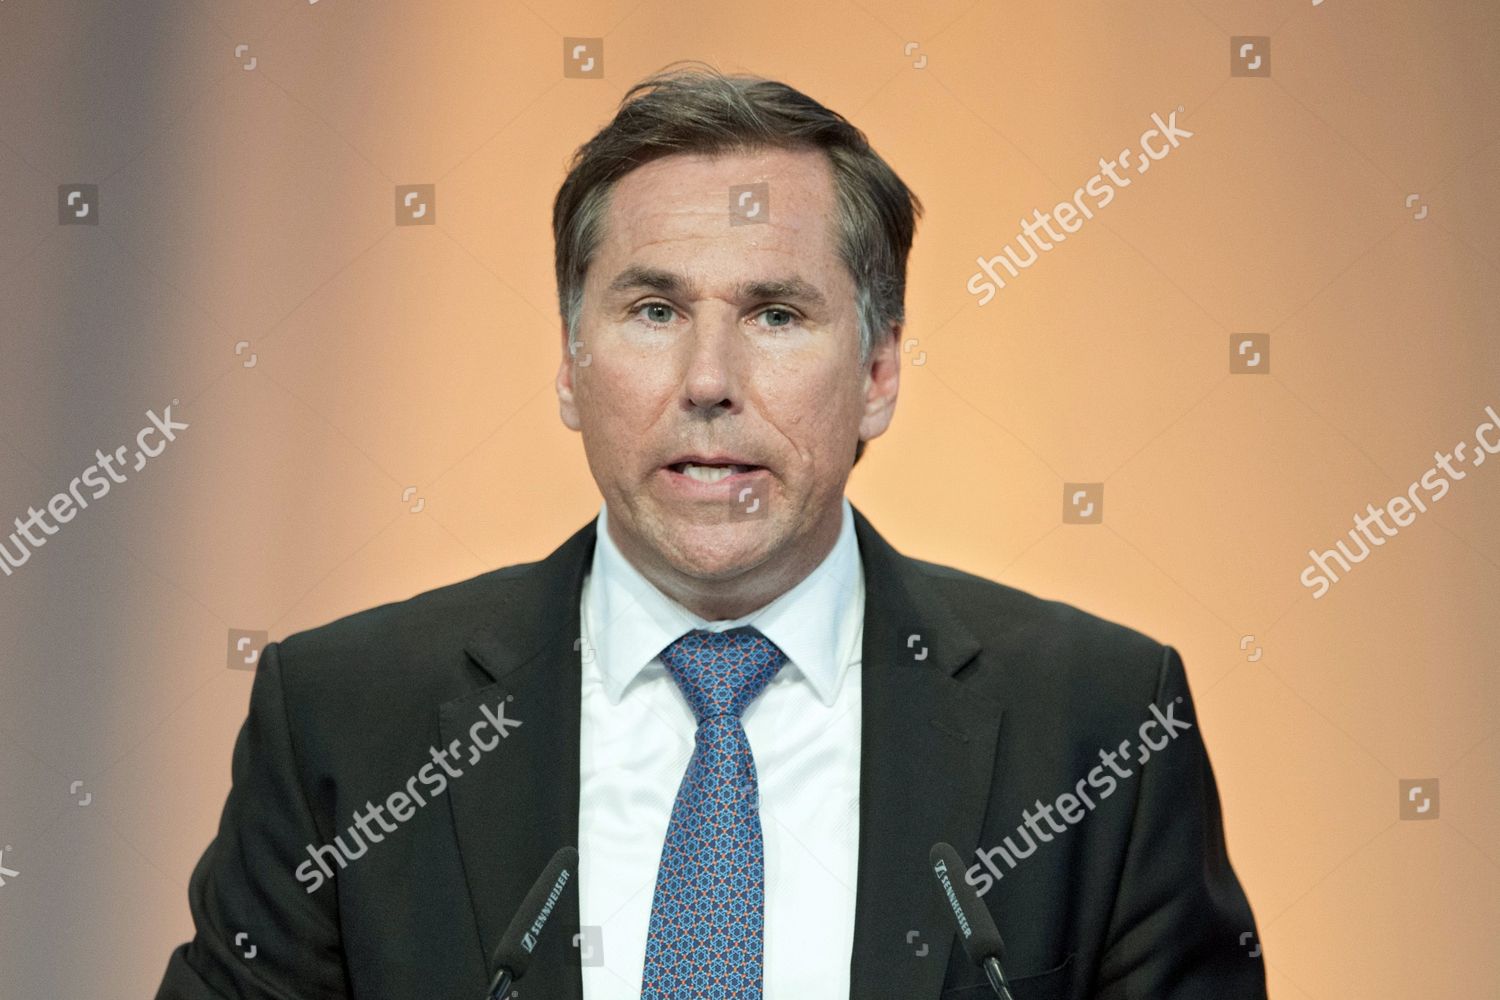 Sika Ceo Jan Jenisch Speaks During Annual Editorial Stock Photo Stock Image Shutterstock